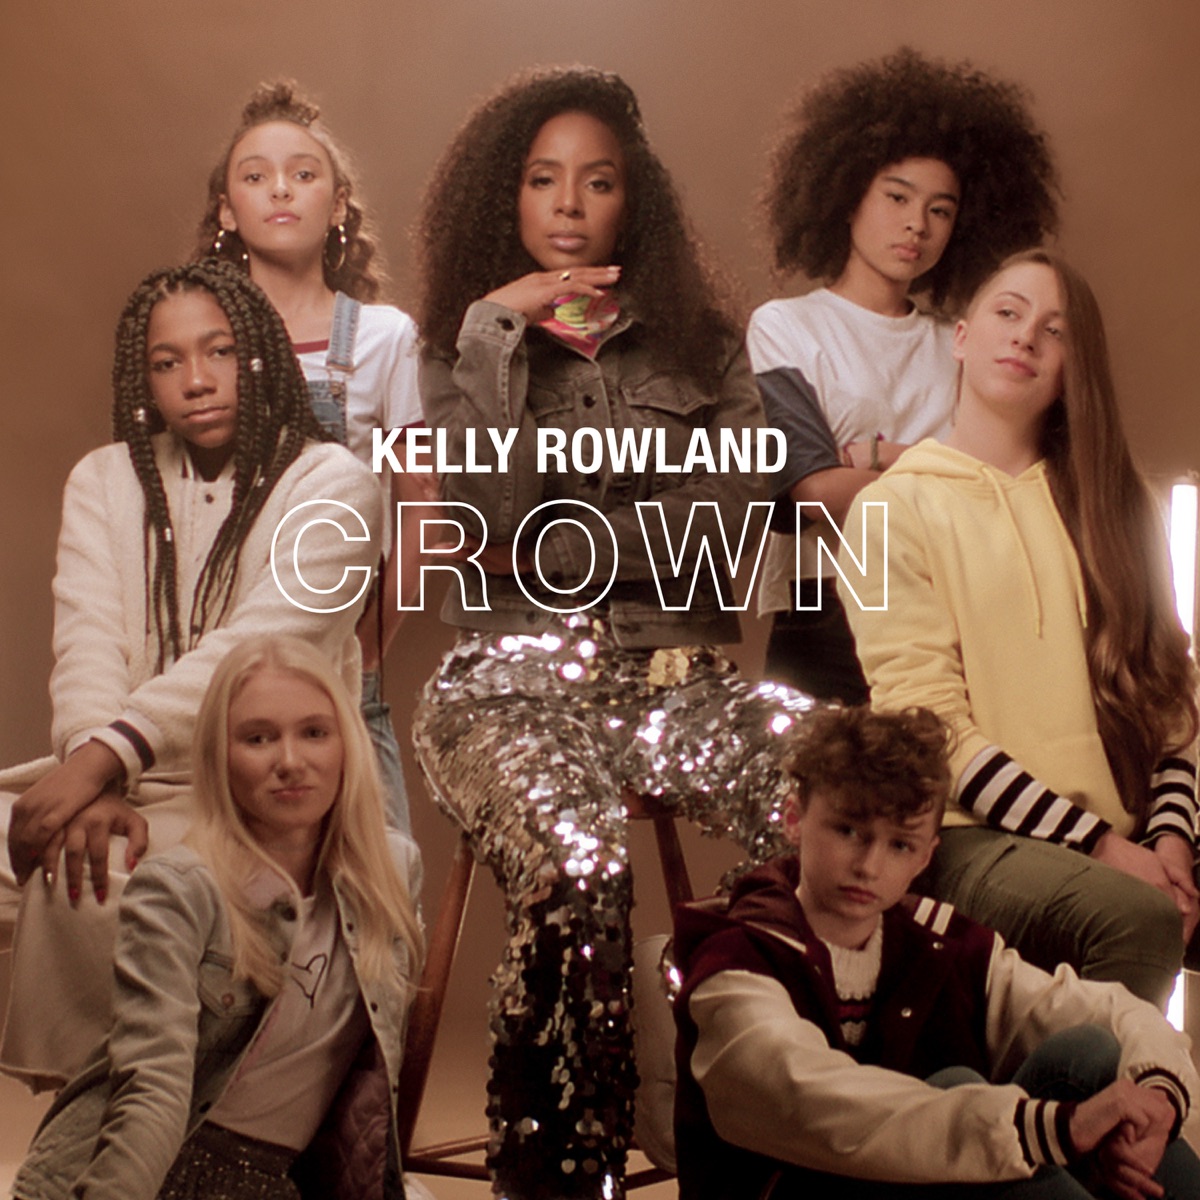 Kelly Rowland Crown cover artwork